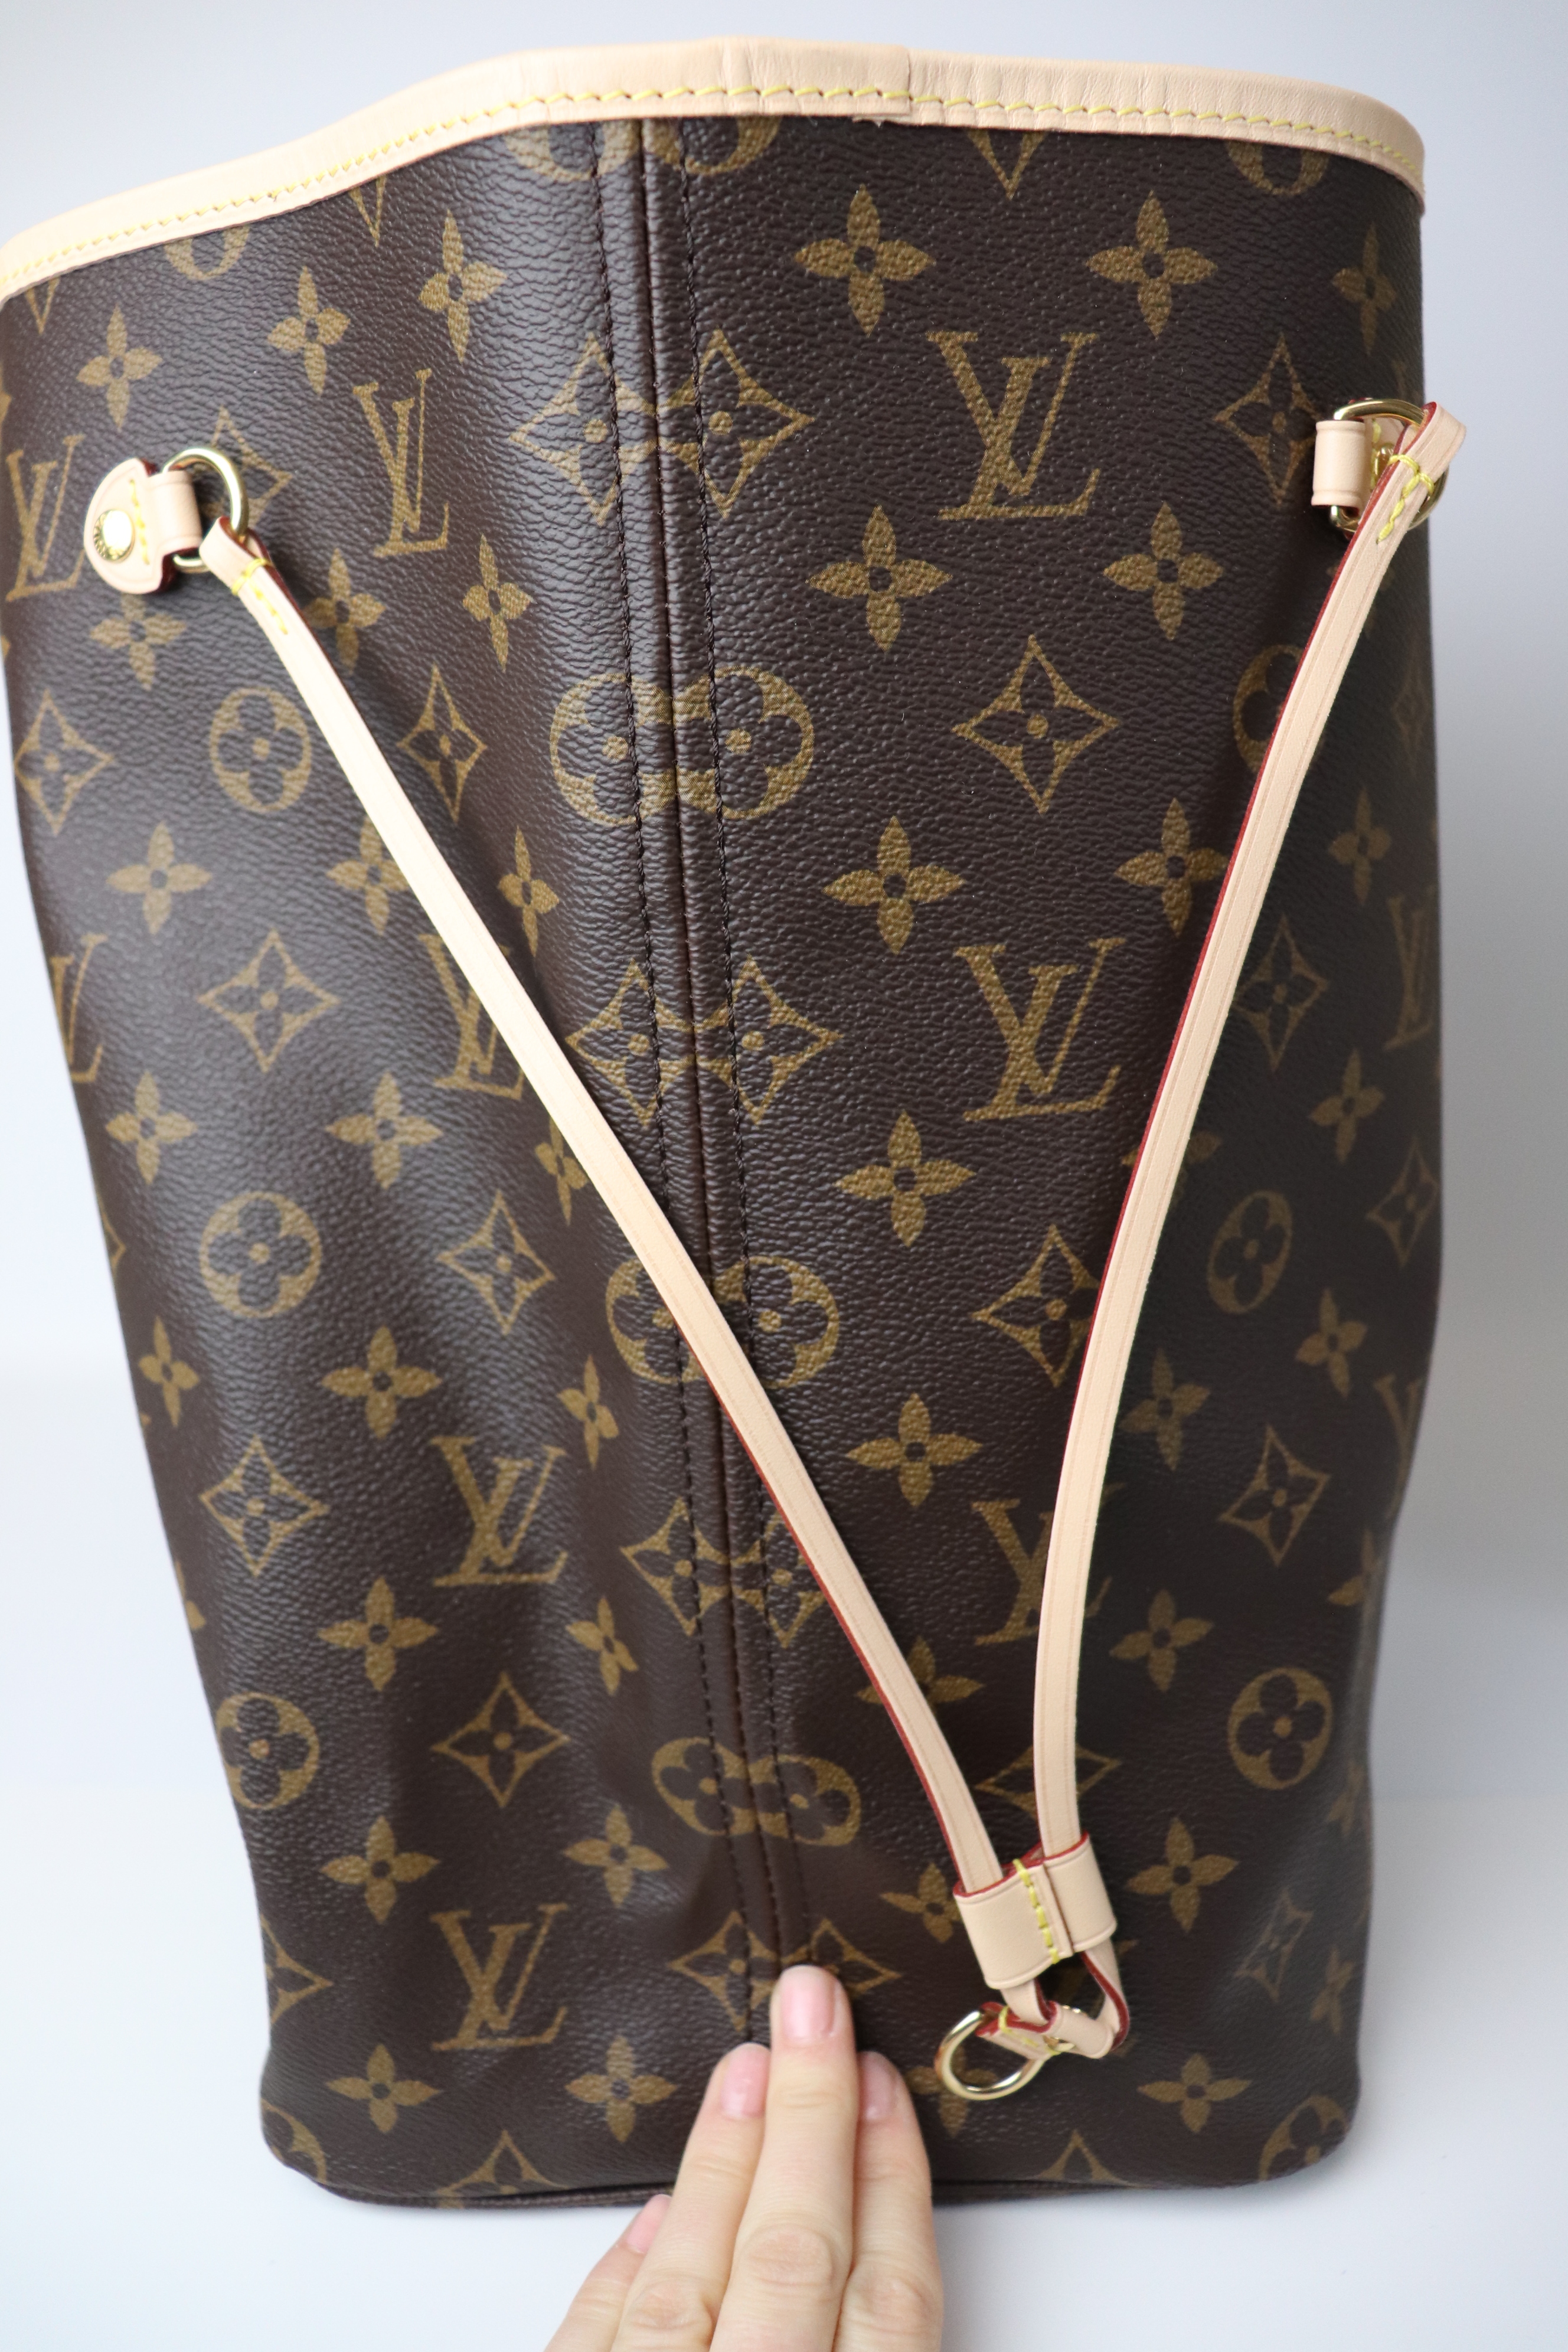 Louis Vuitton On the Go Beige Puffer Bag, New in Dustbag - Julia Rose  Boston